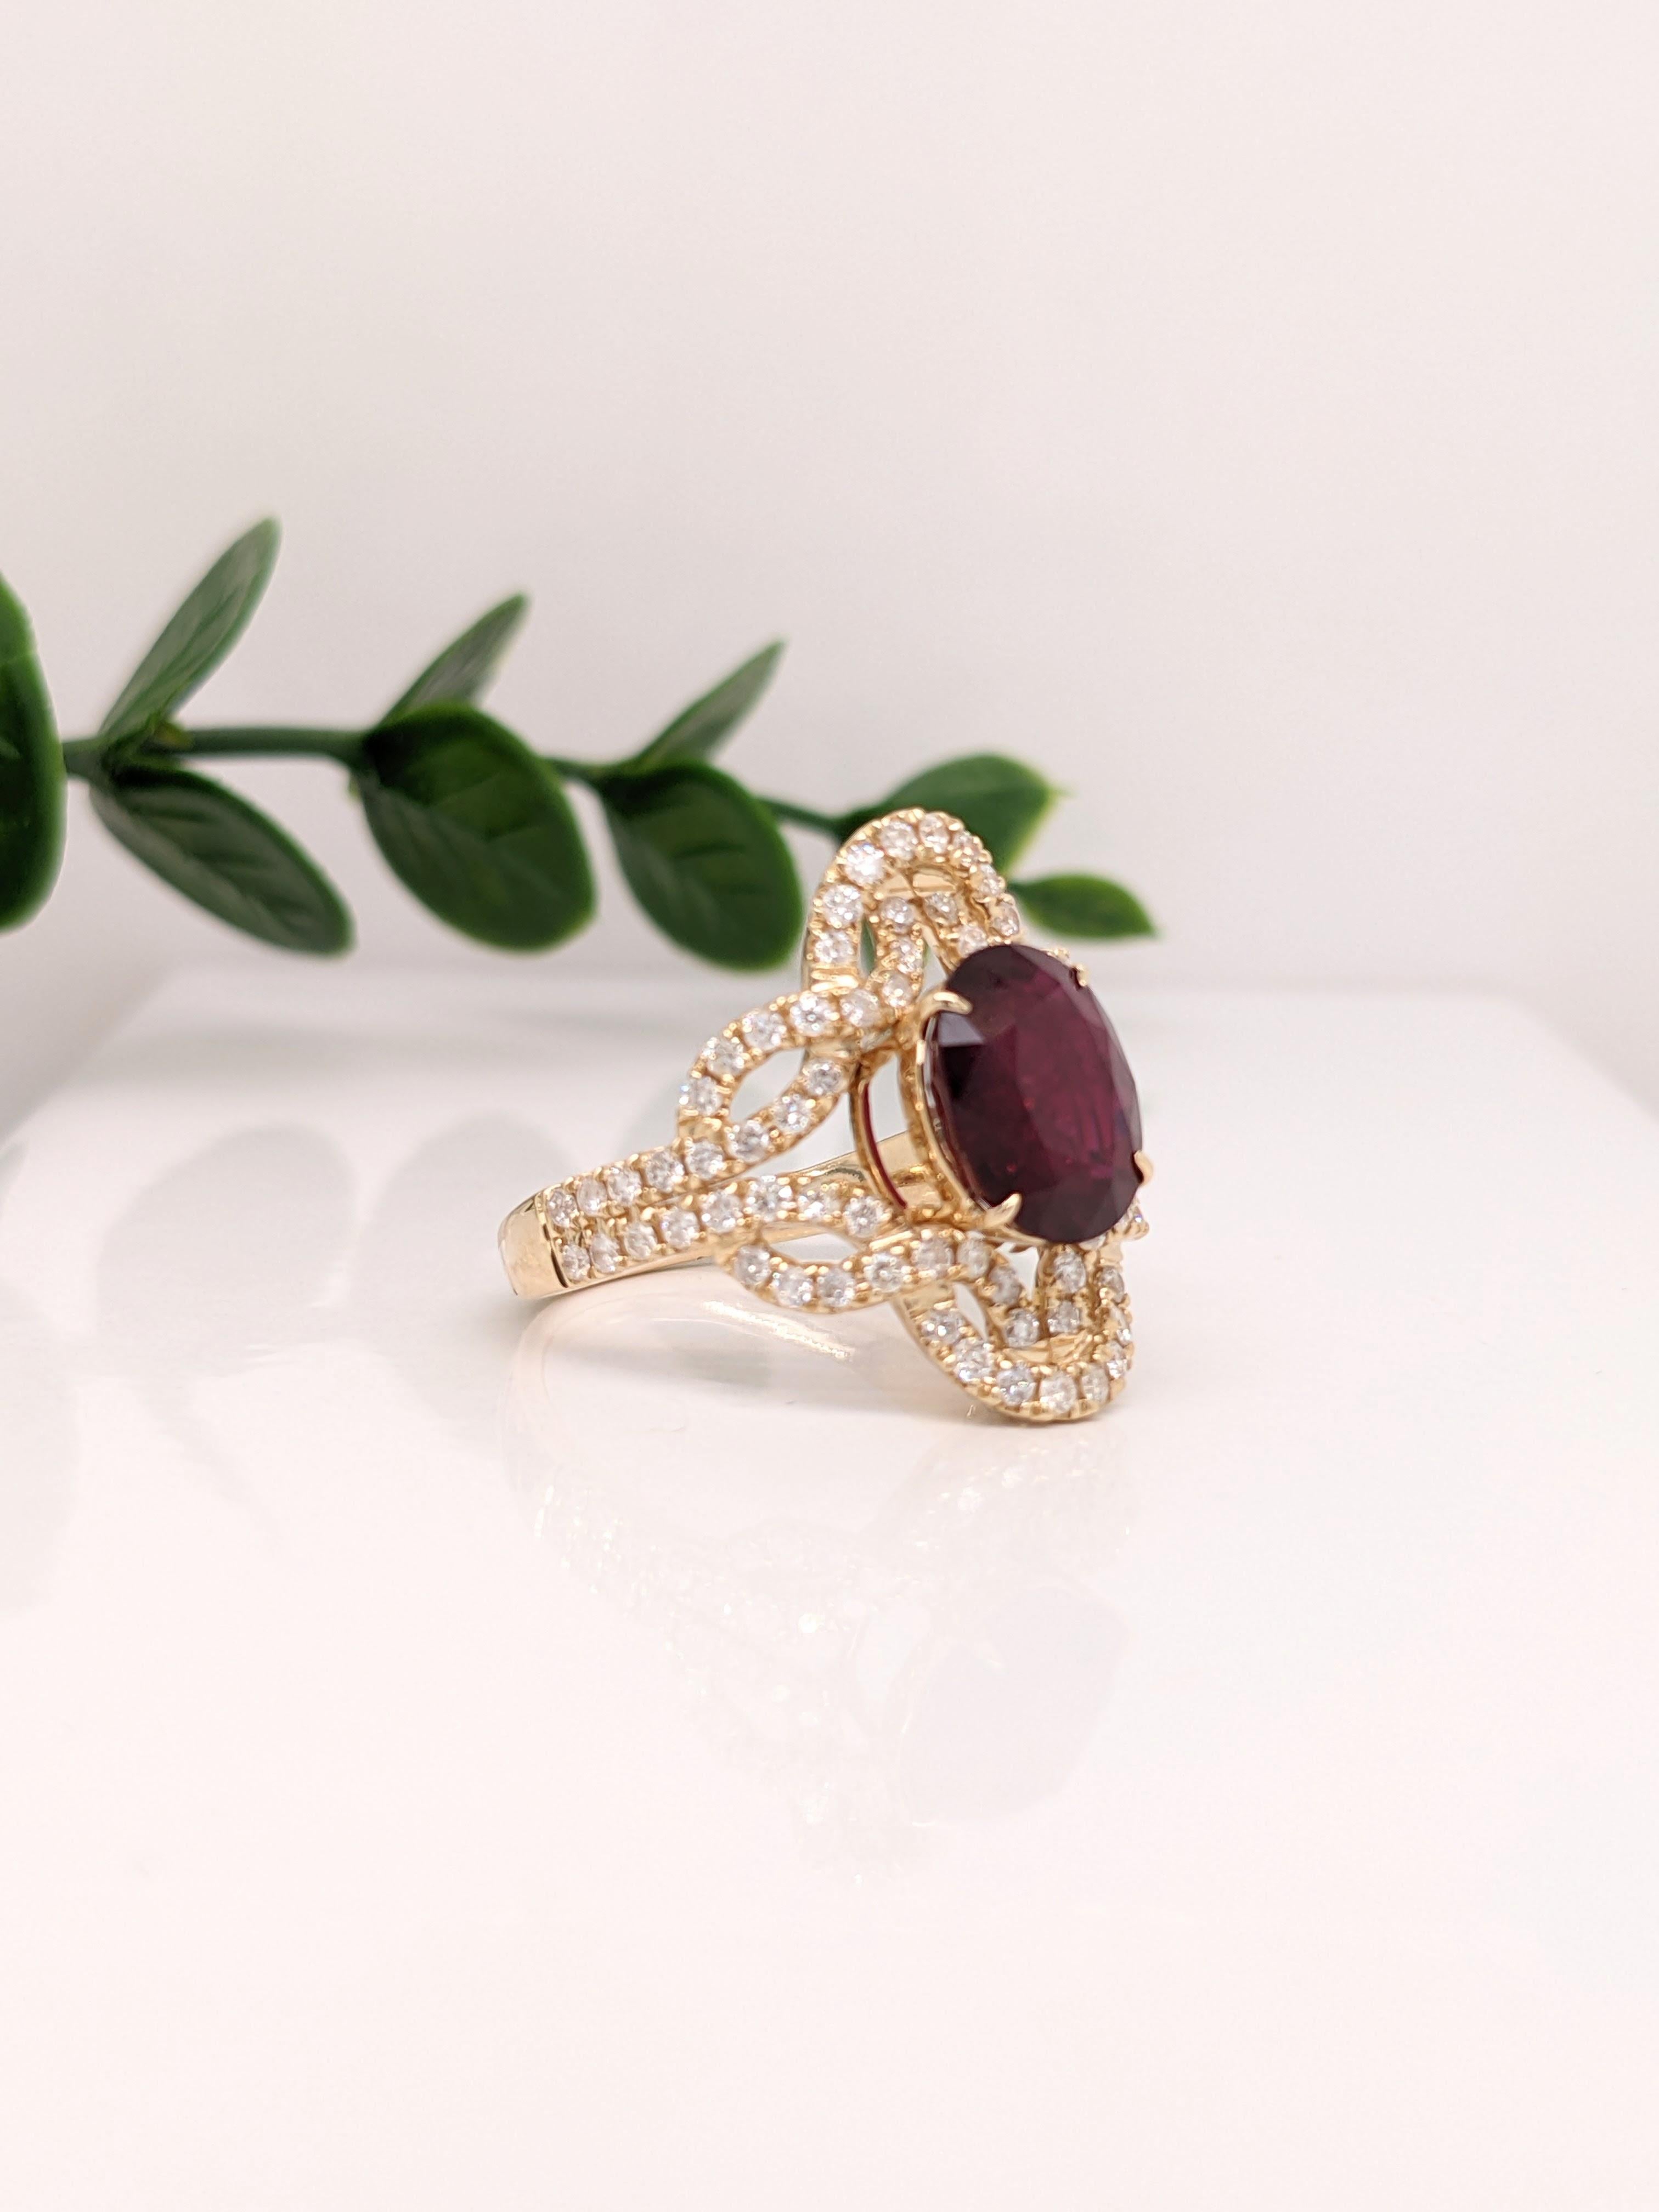 This beautiful infinity diamond halo ring features a sparkling red ruby in and 14k yellow gold and twisting infinity diamond halo.

Specifications

Stone: Ruby
Origin: Mozambique
Treatment: Heated
Hardness: 9
Shape: Oval
Size: 9.5x6.5mm
Weight: